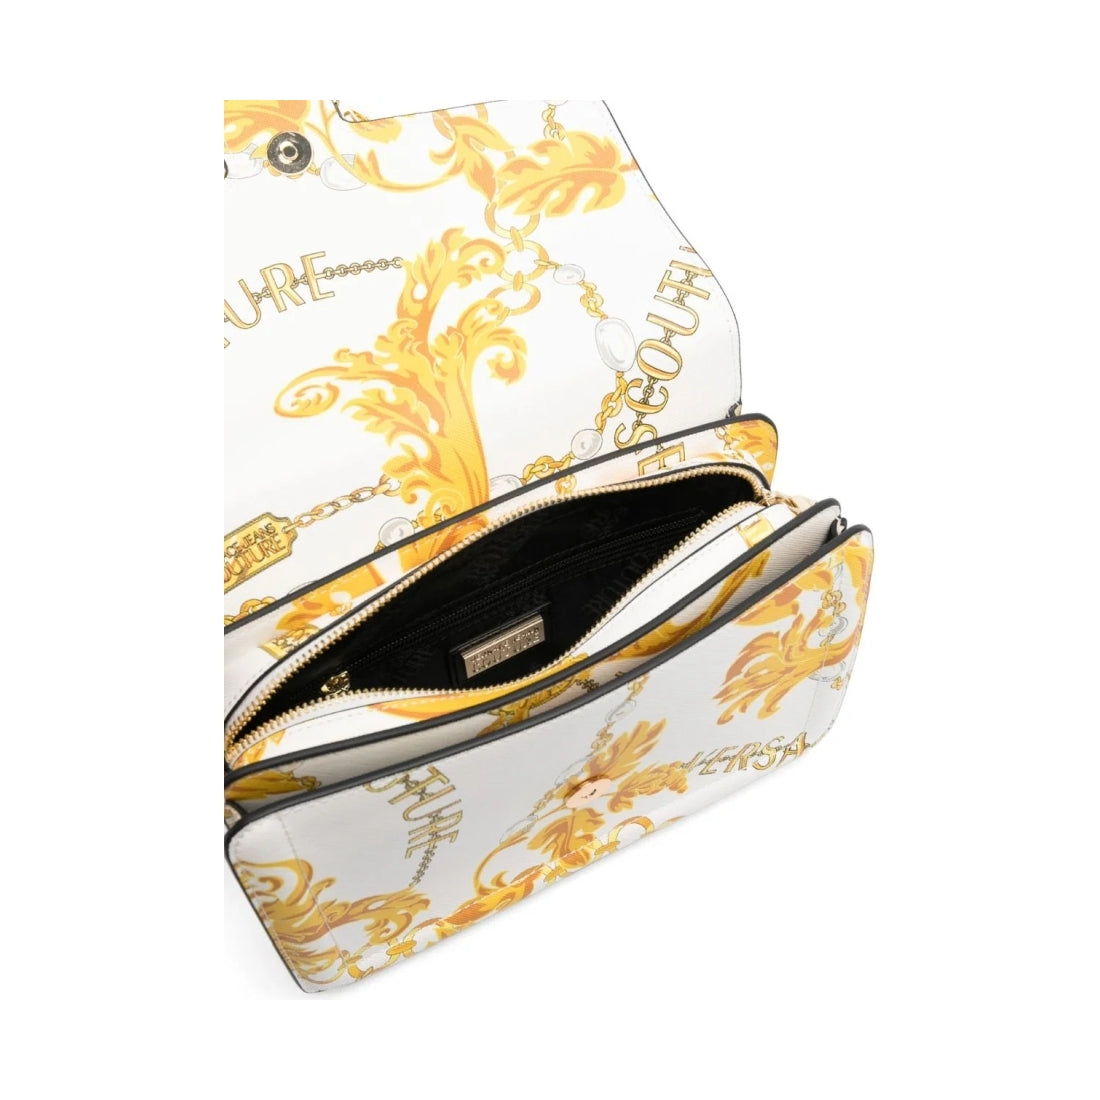 Versace Jeans Couture womens white, gold couture a spalla bag | Vilbury London